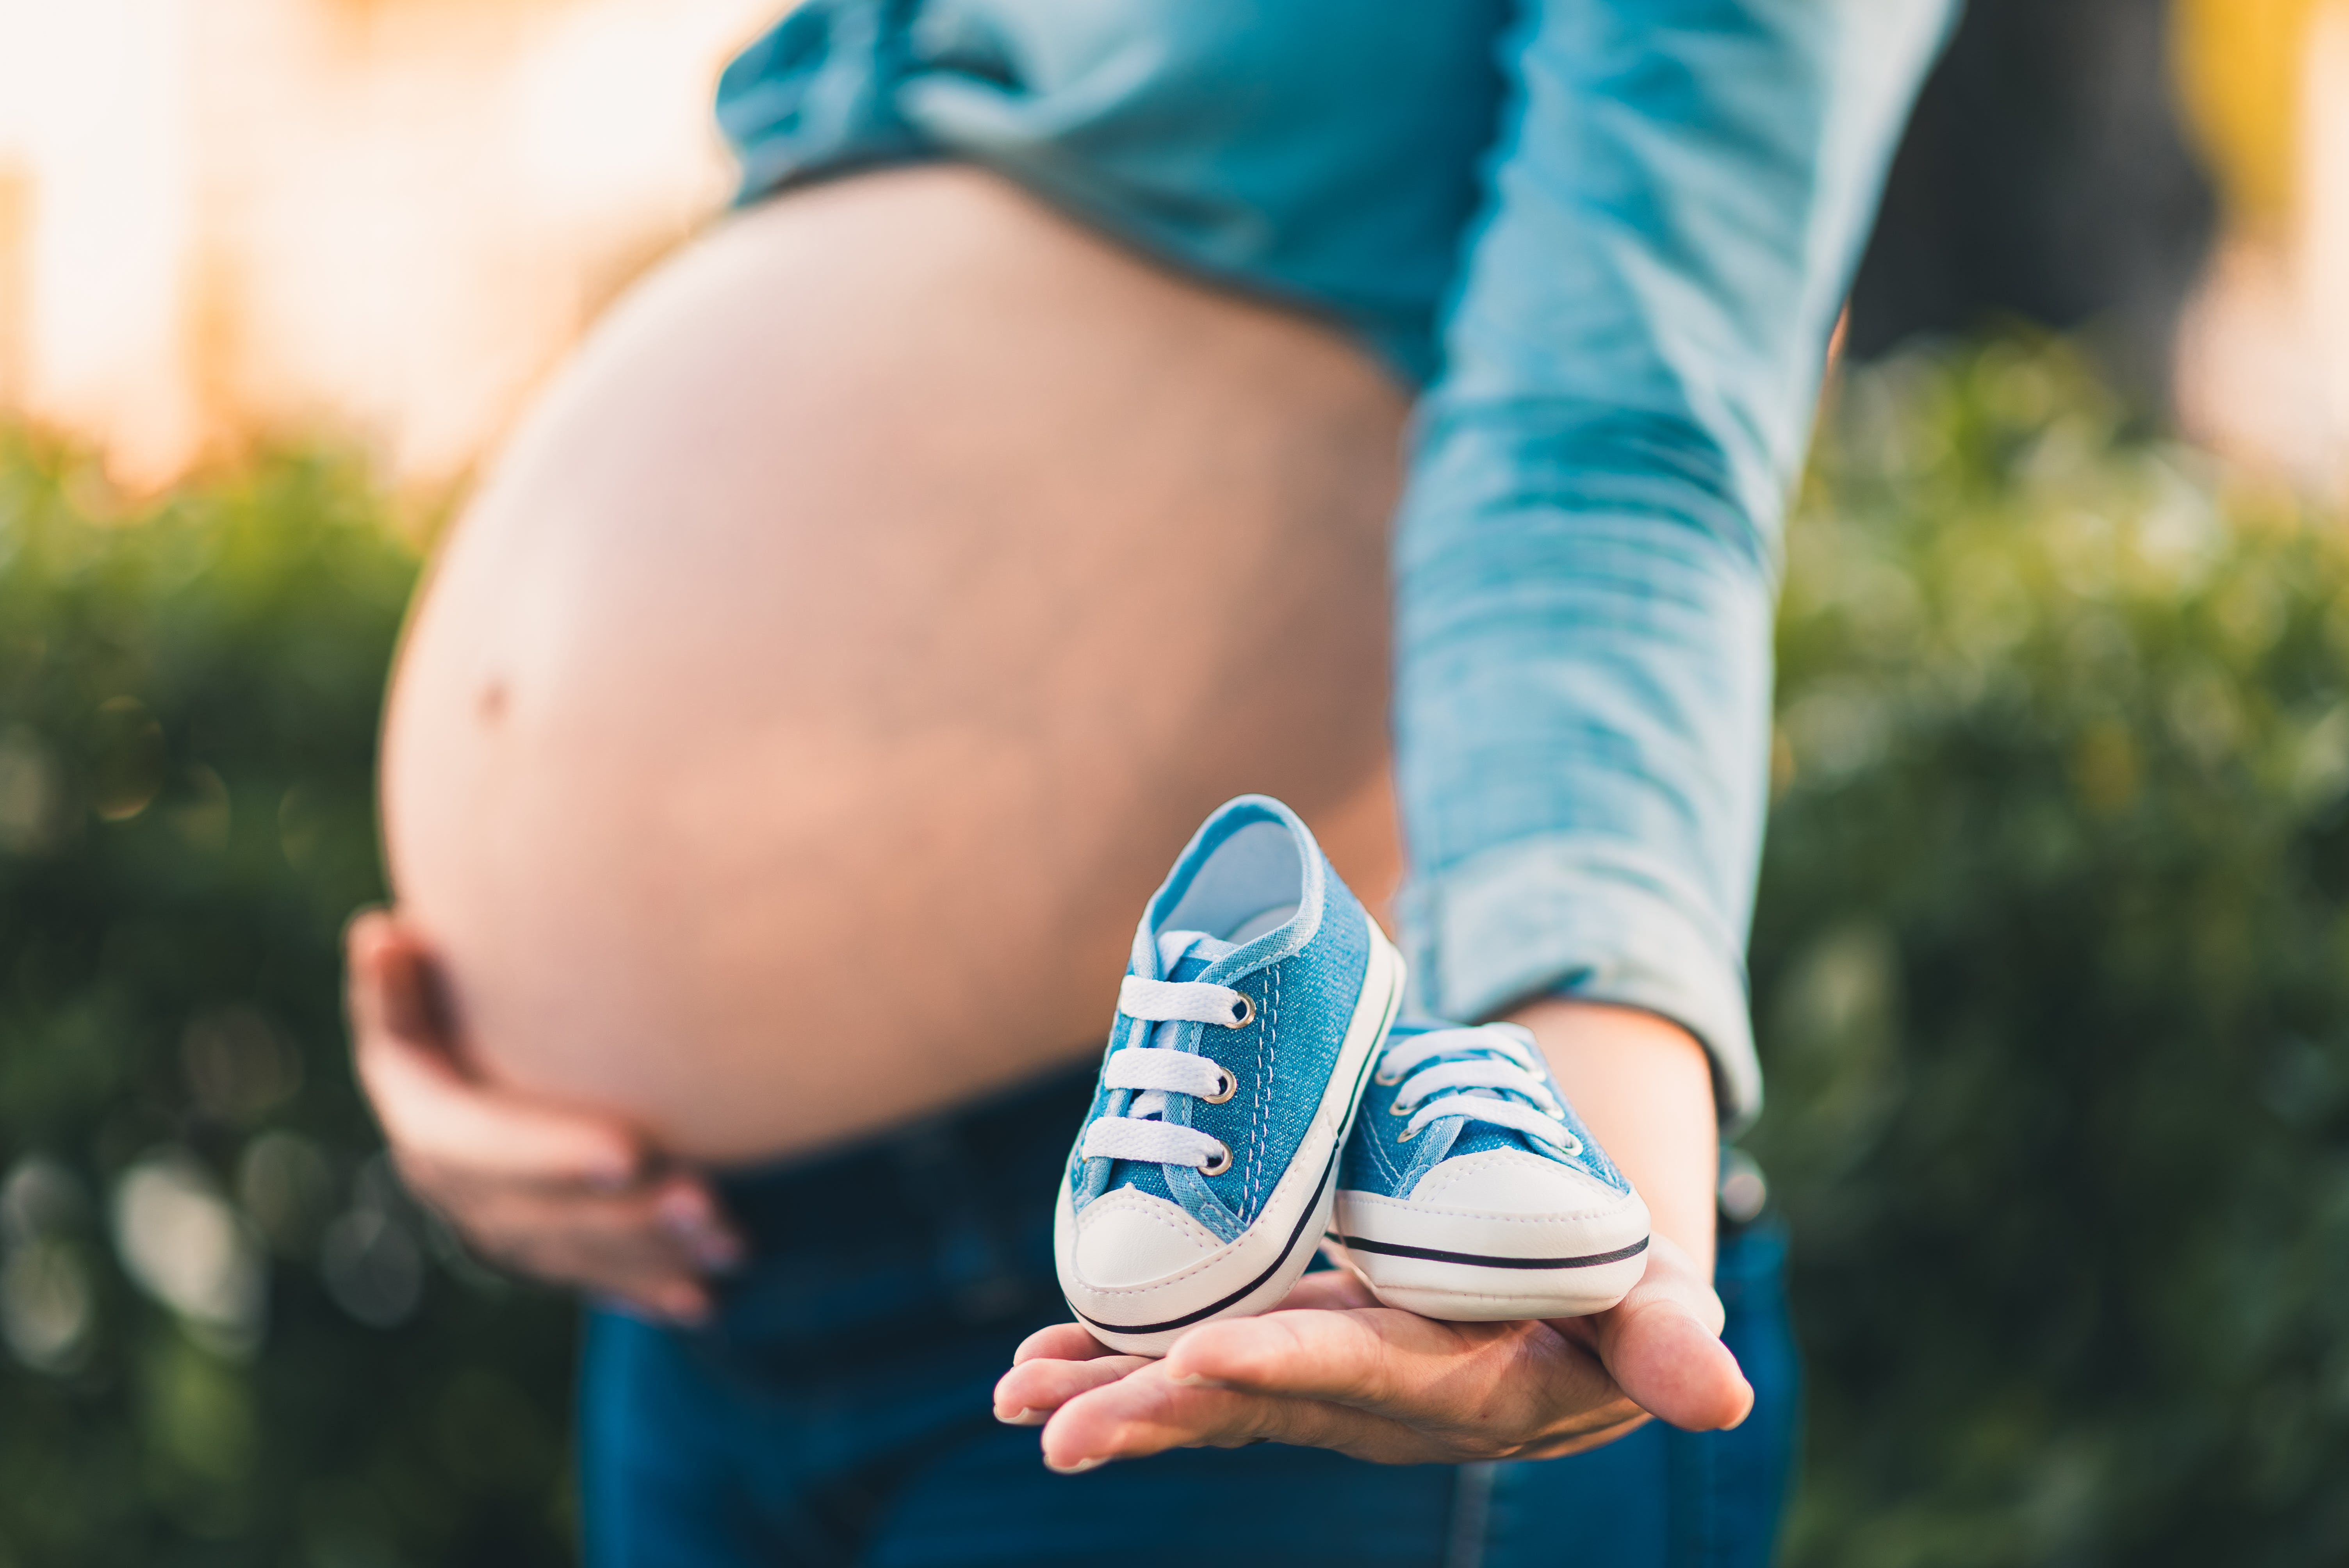 A pregnant woman holding her belly in one hand and a pair of blue baby sneakers in the other | Source: Pexels